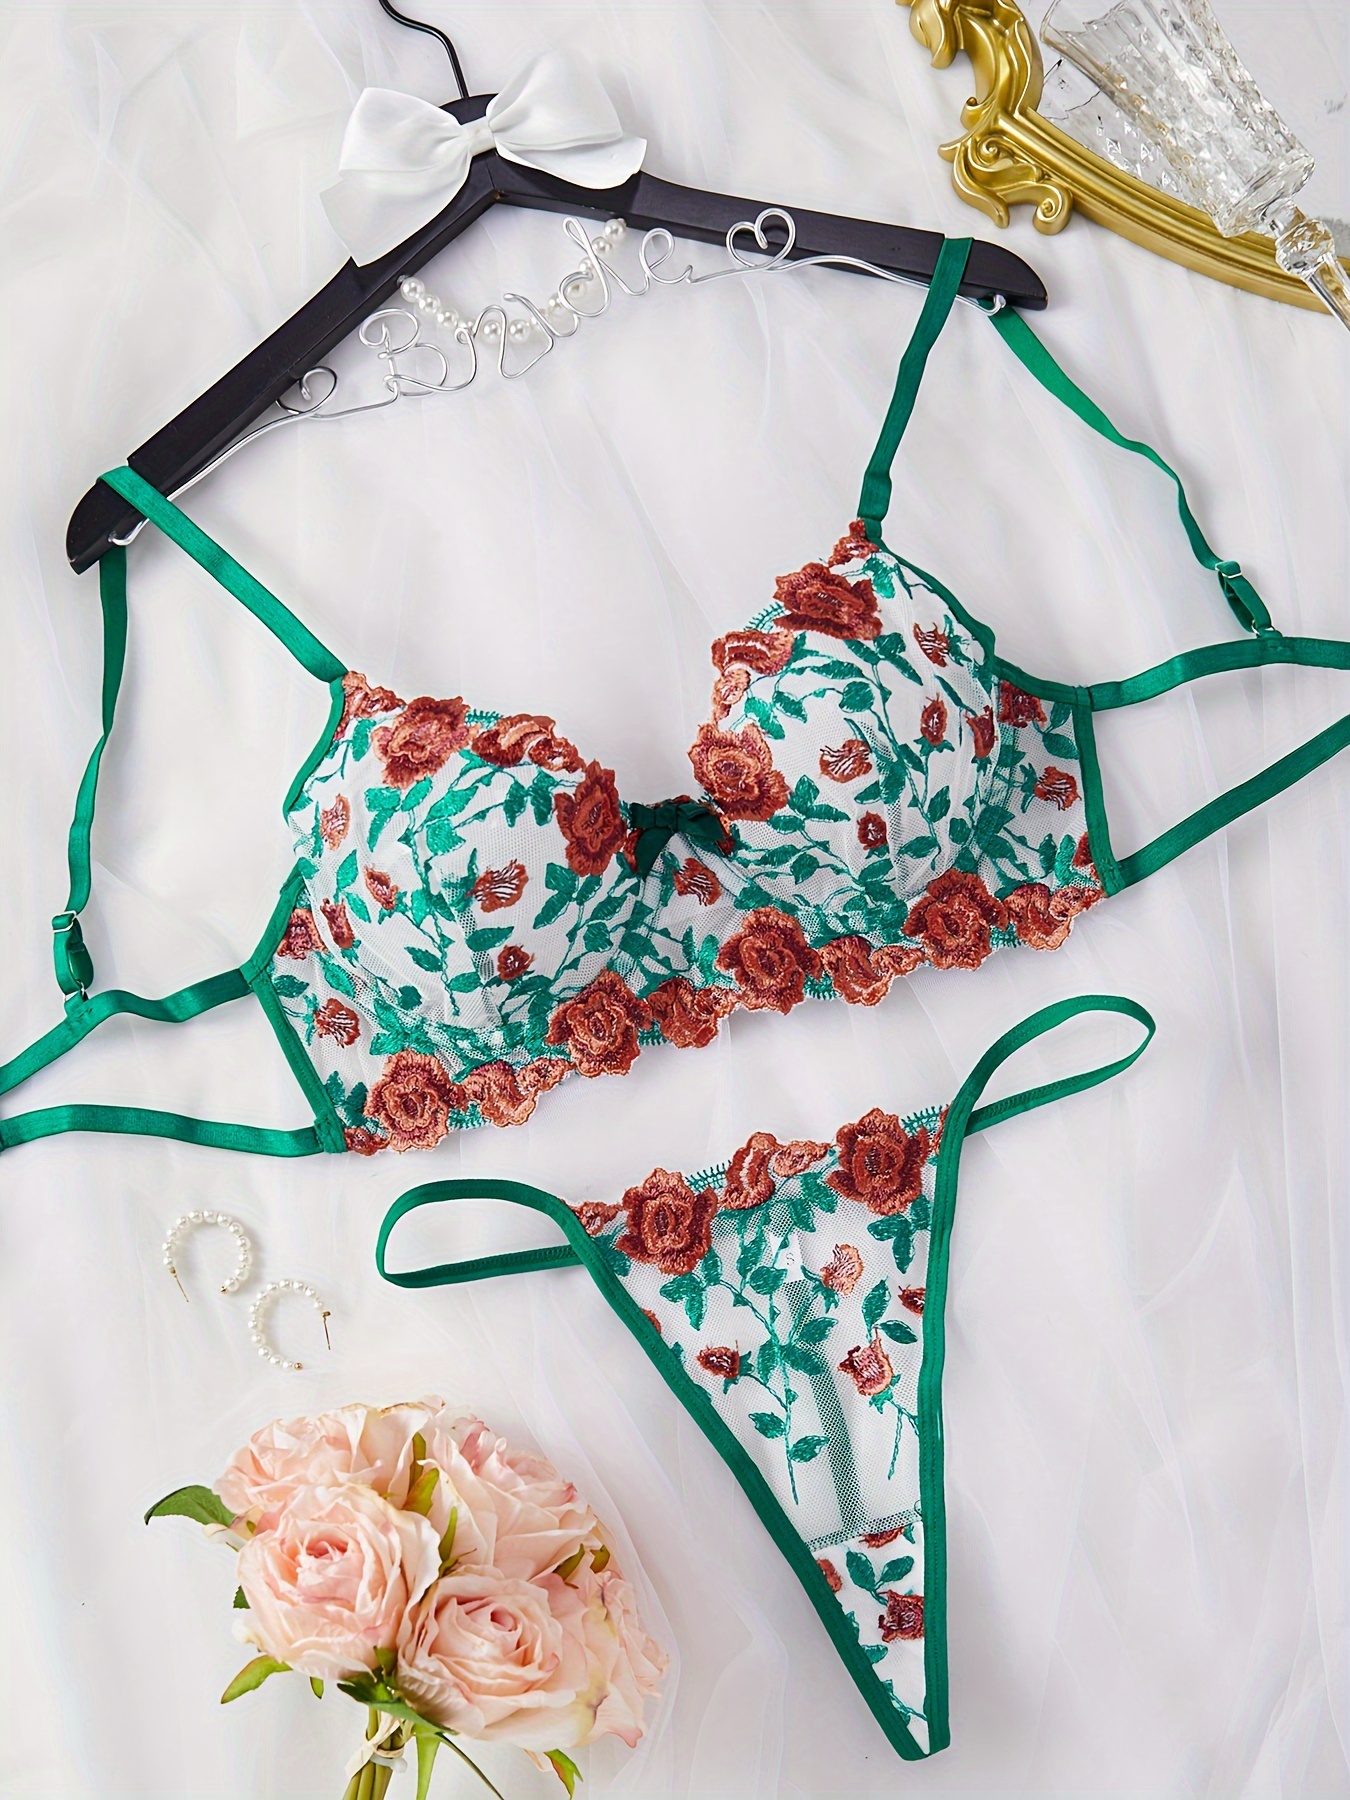 Floral Embroidery Semi Sheer Lingerie Set, Intimates Bra & Thong, Women's  Sexy Lingerie & Underwear